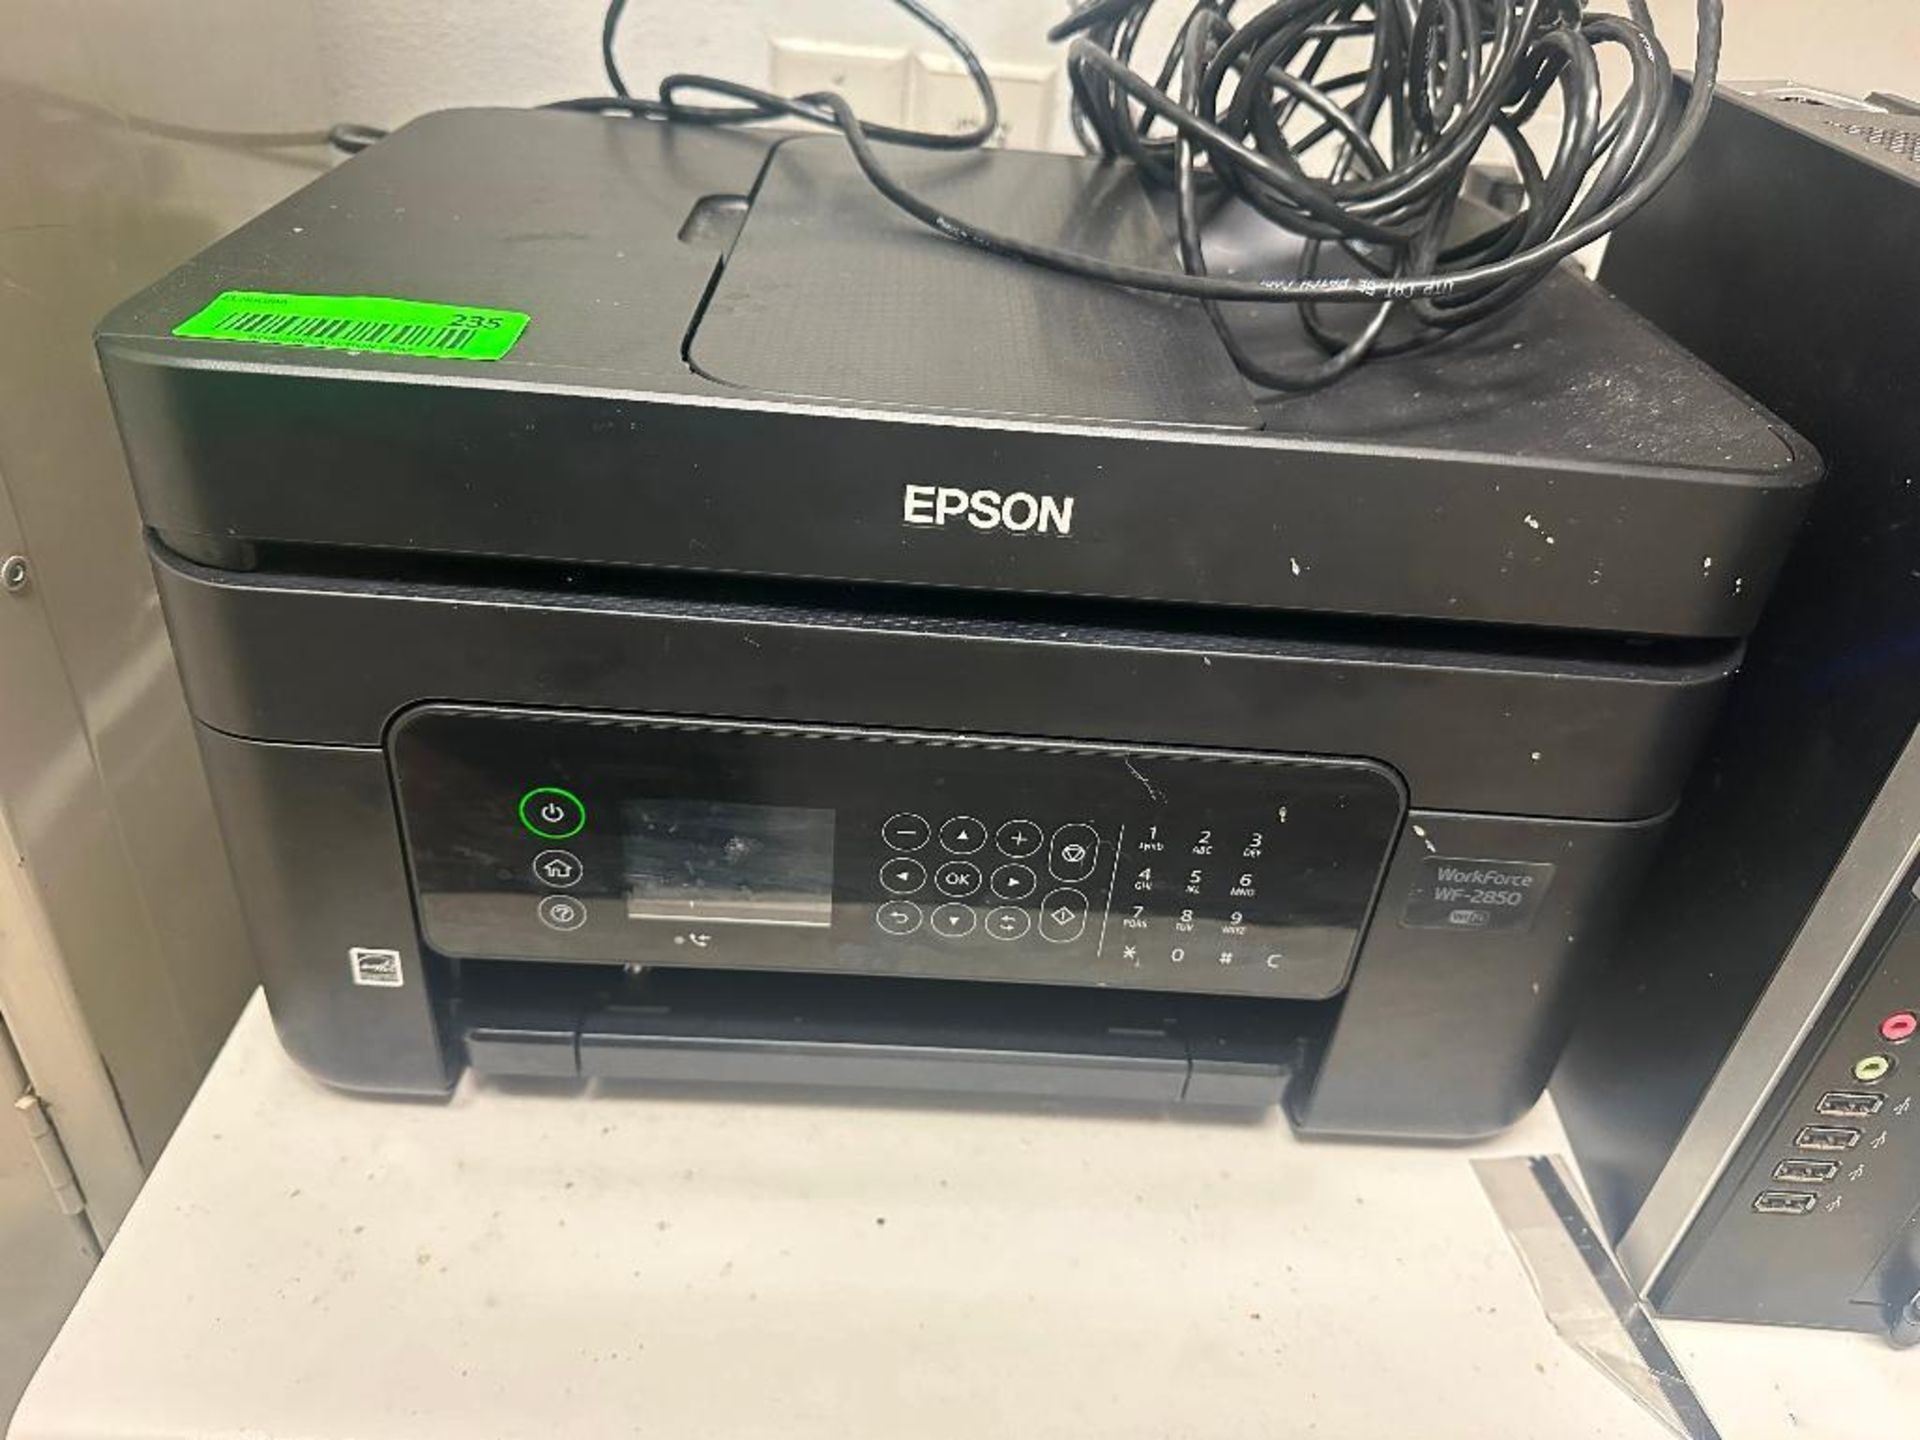 DESCRIPTION EPSON WORK FORCE 2850 ALL IN ONE PRINTER BRAND / MODEL: EPSON WORK FORCE 2850 LOCATION 1